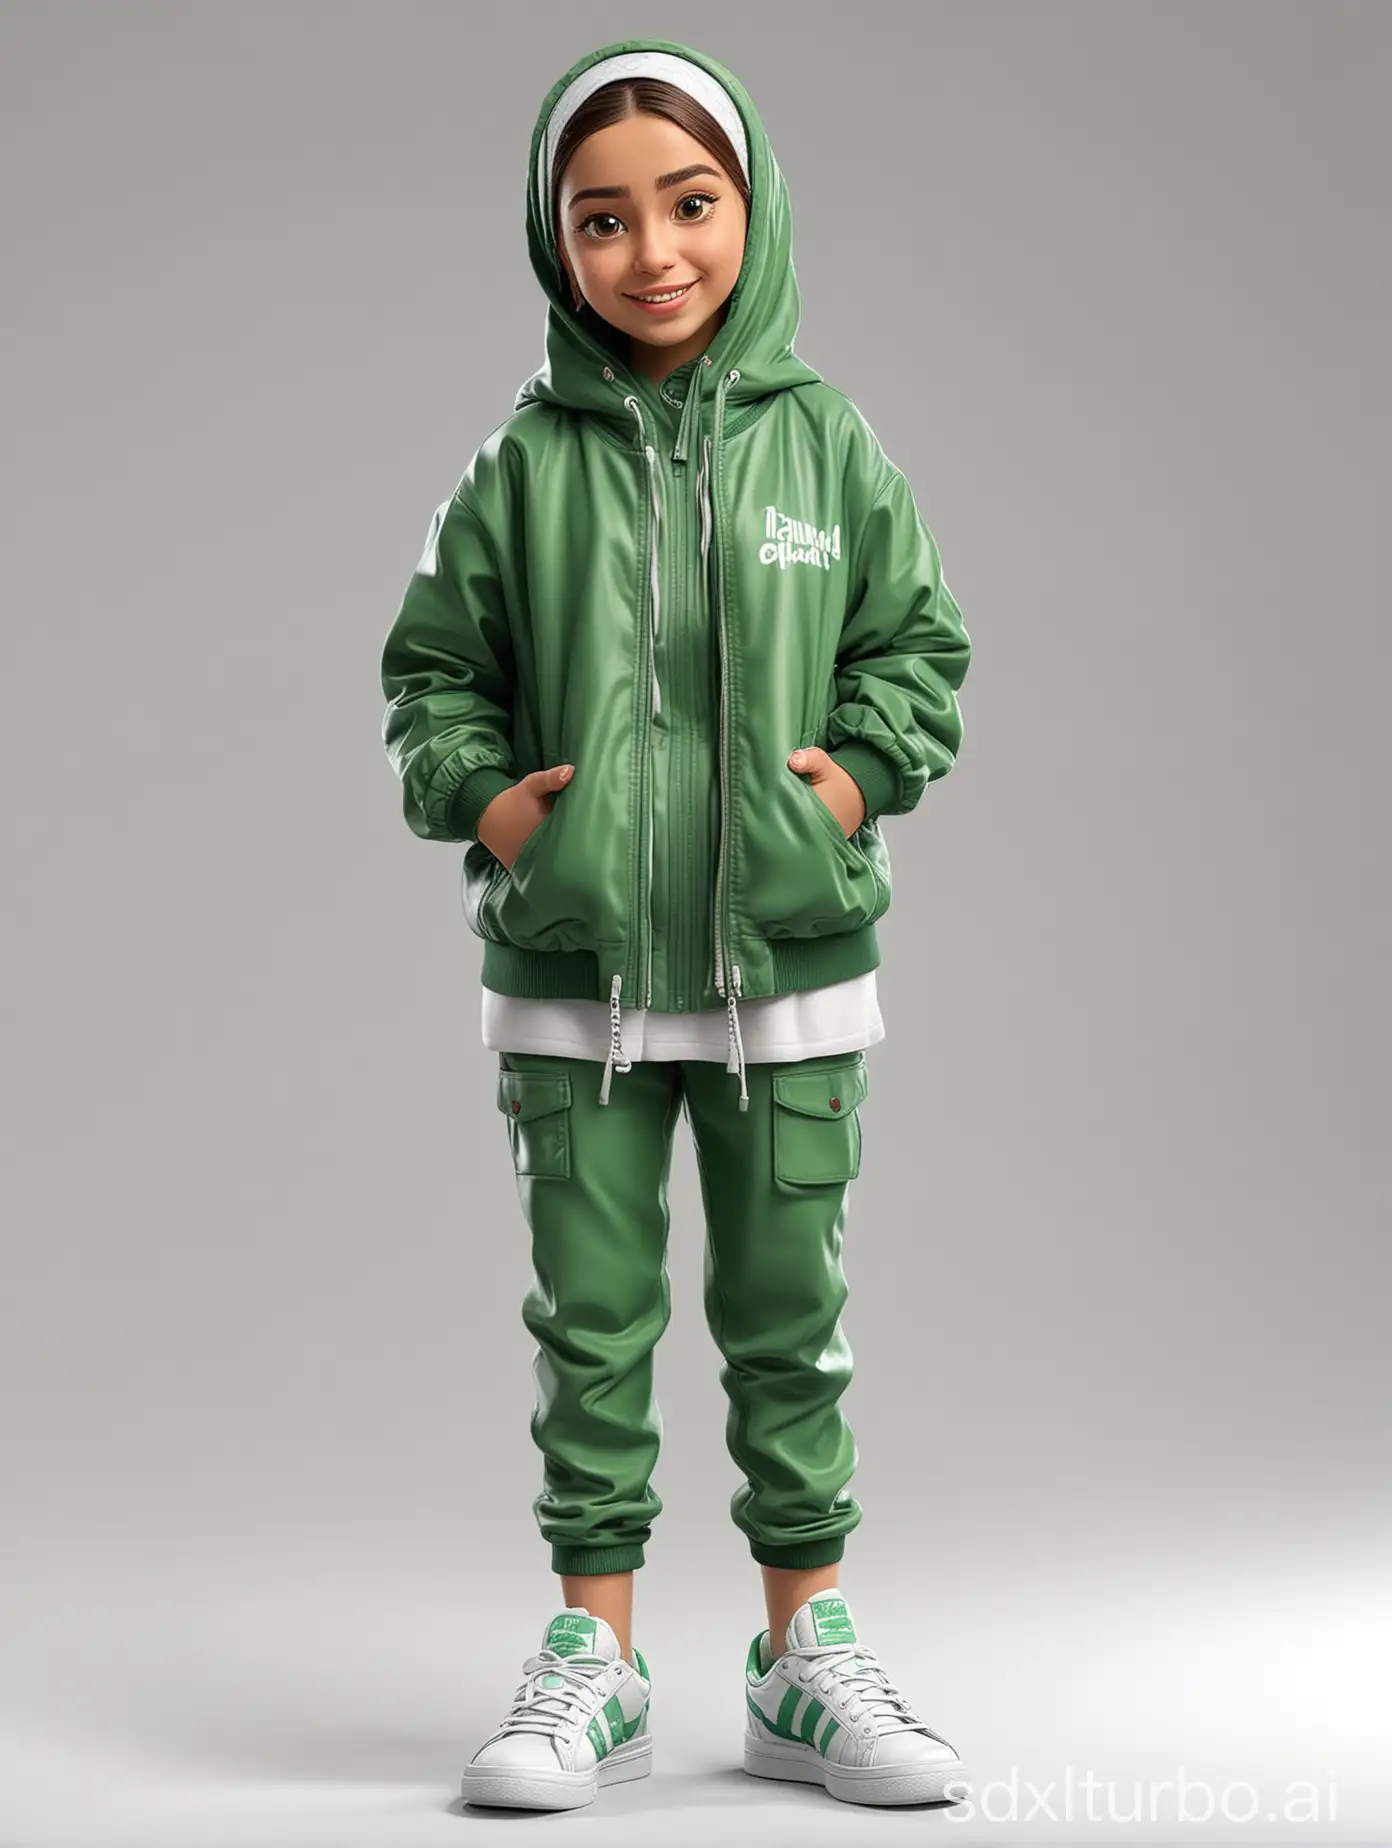 Full of 3D caricature of a moslem girl wearing a green jacket, white and green sneakers, standing like a model. White background. Realistic.